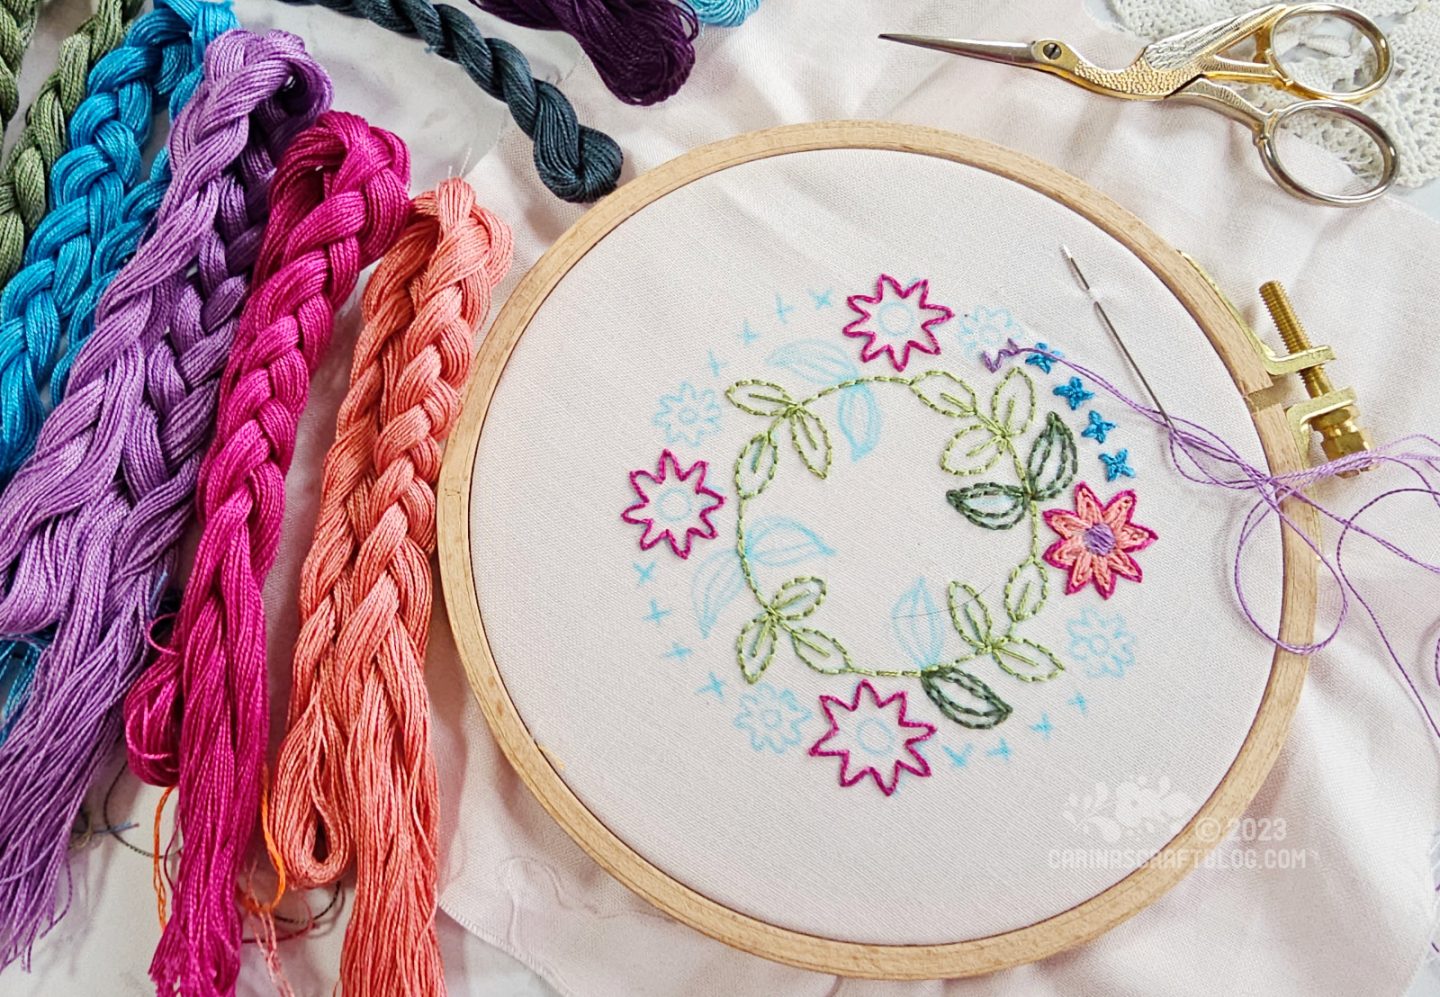 Overhead view of a small embroidery hoop with pale pink fabric. On the fabric is a partially embroidered wreath design. To the left of the hoop are several large skeins of embroidery thread in jewel colours.